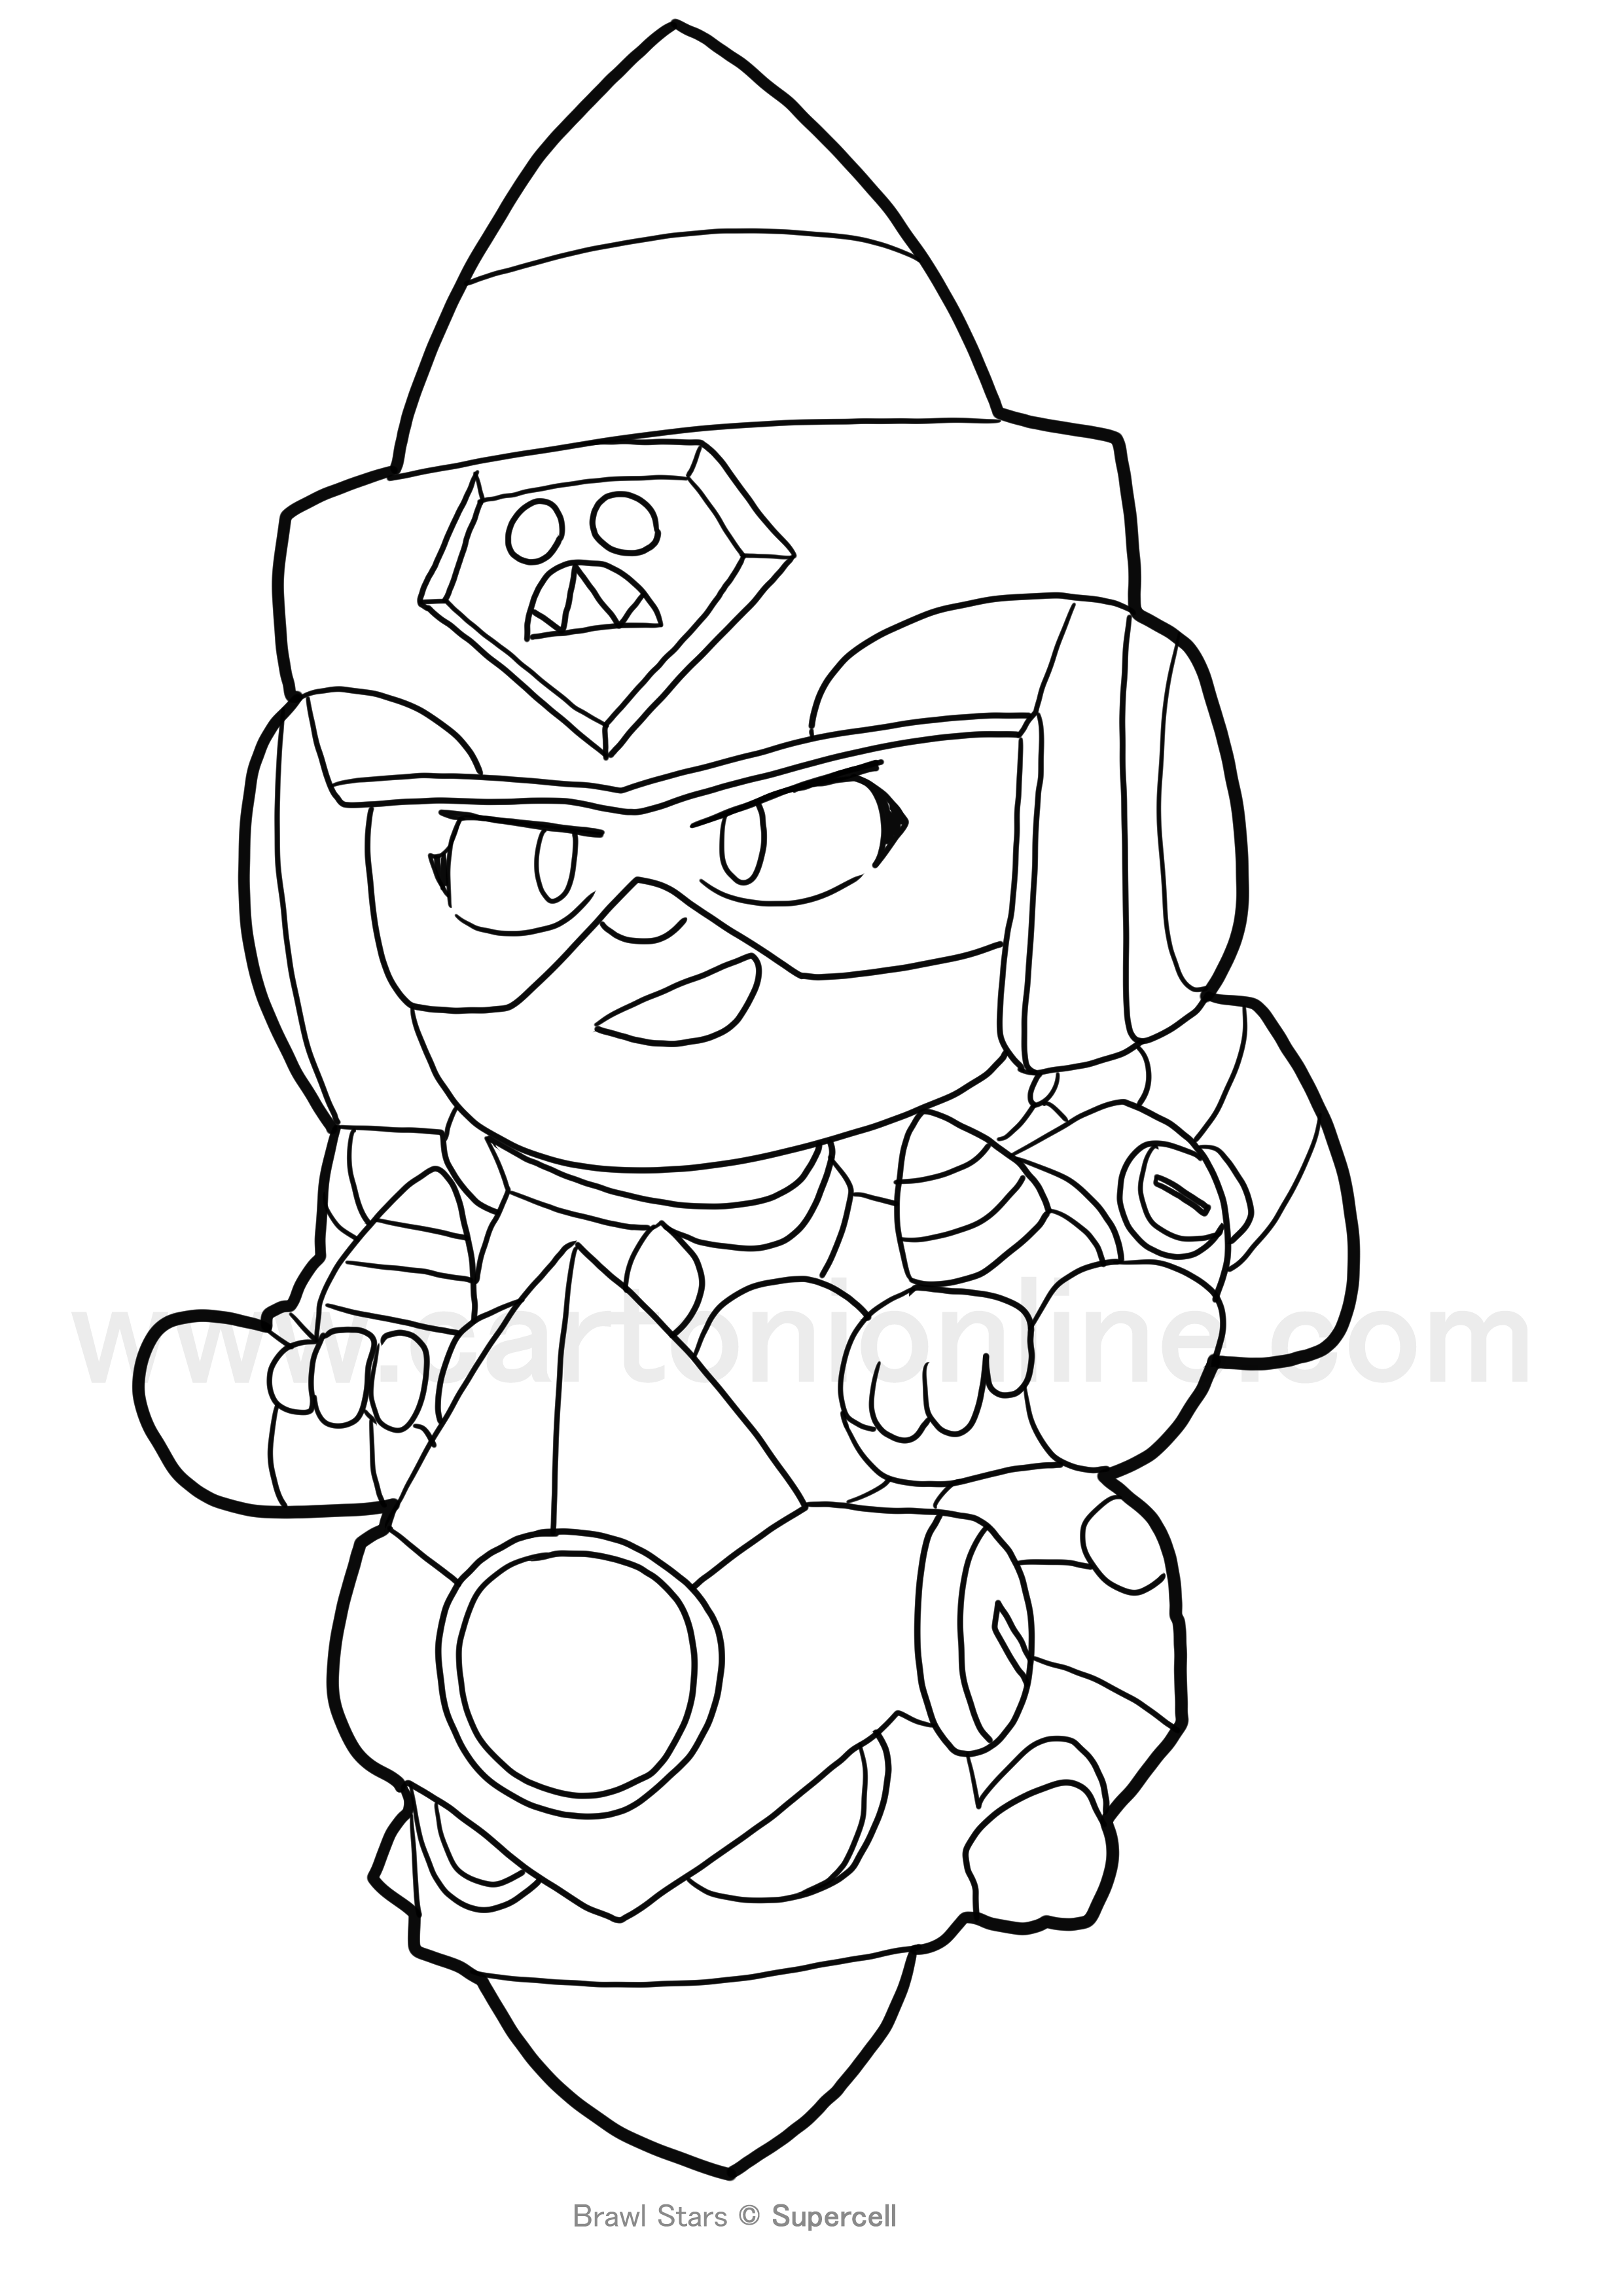 Ultra Driller Jacky from Brawl Stars coloring pages to print and coloring